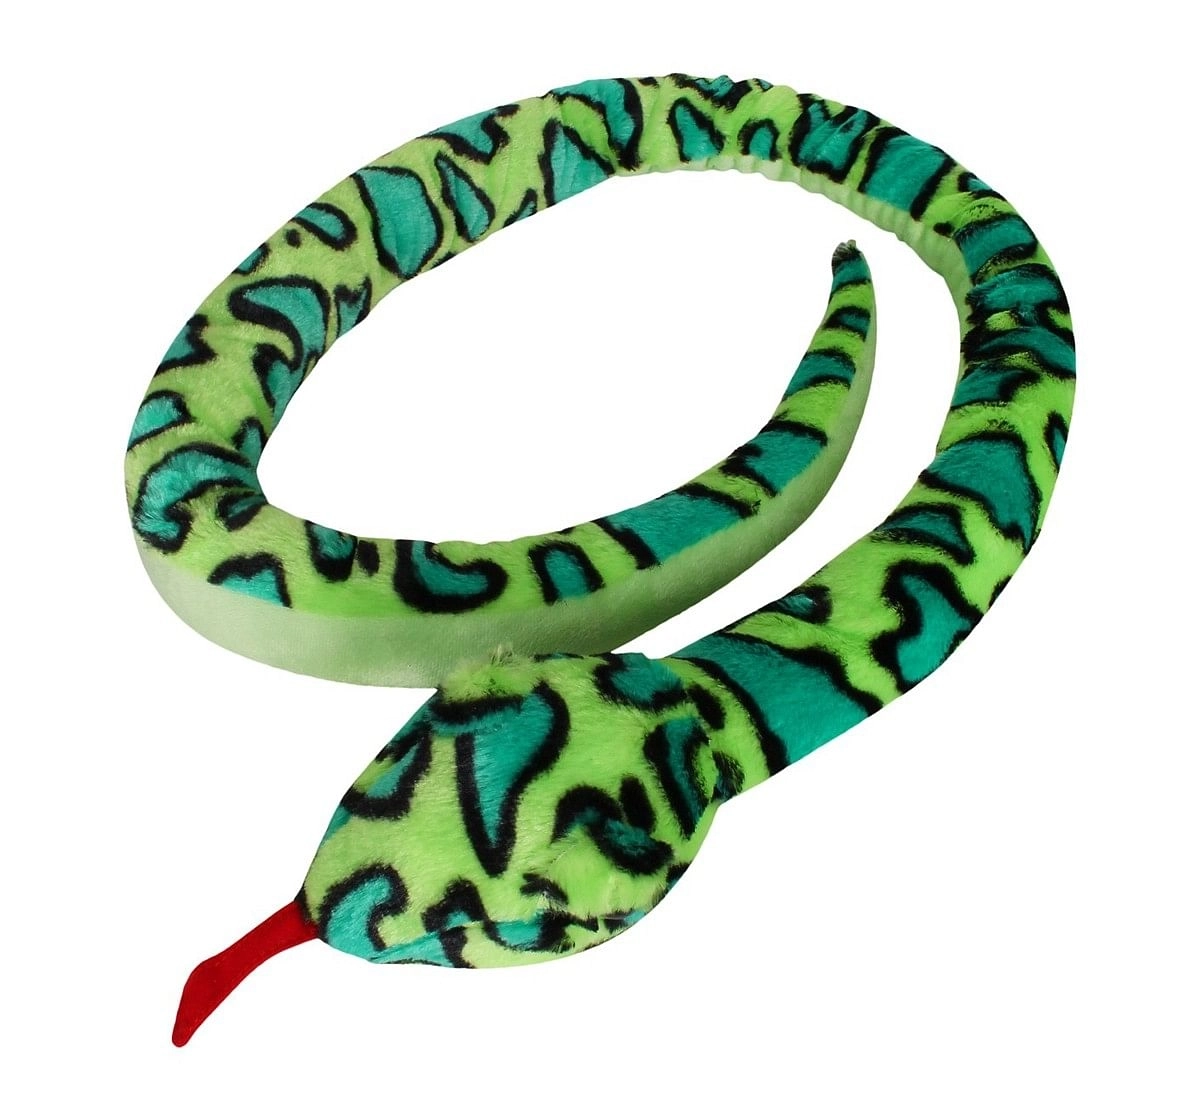 Fuzzbuzz Snake Plush - Green - 165Cm Quirky Soft Toys for Kids age 12M+ - 8 Cm (Green)